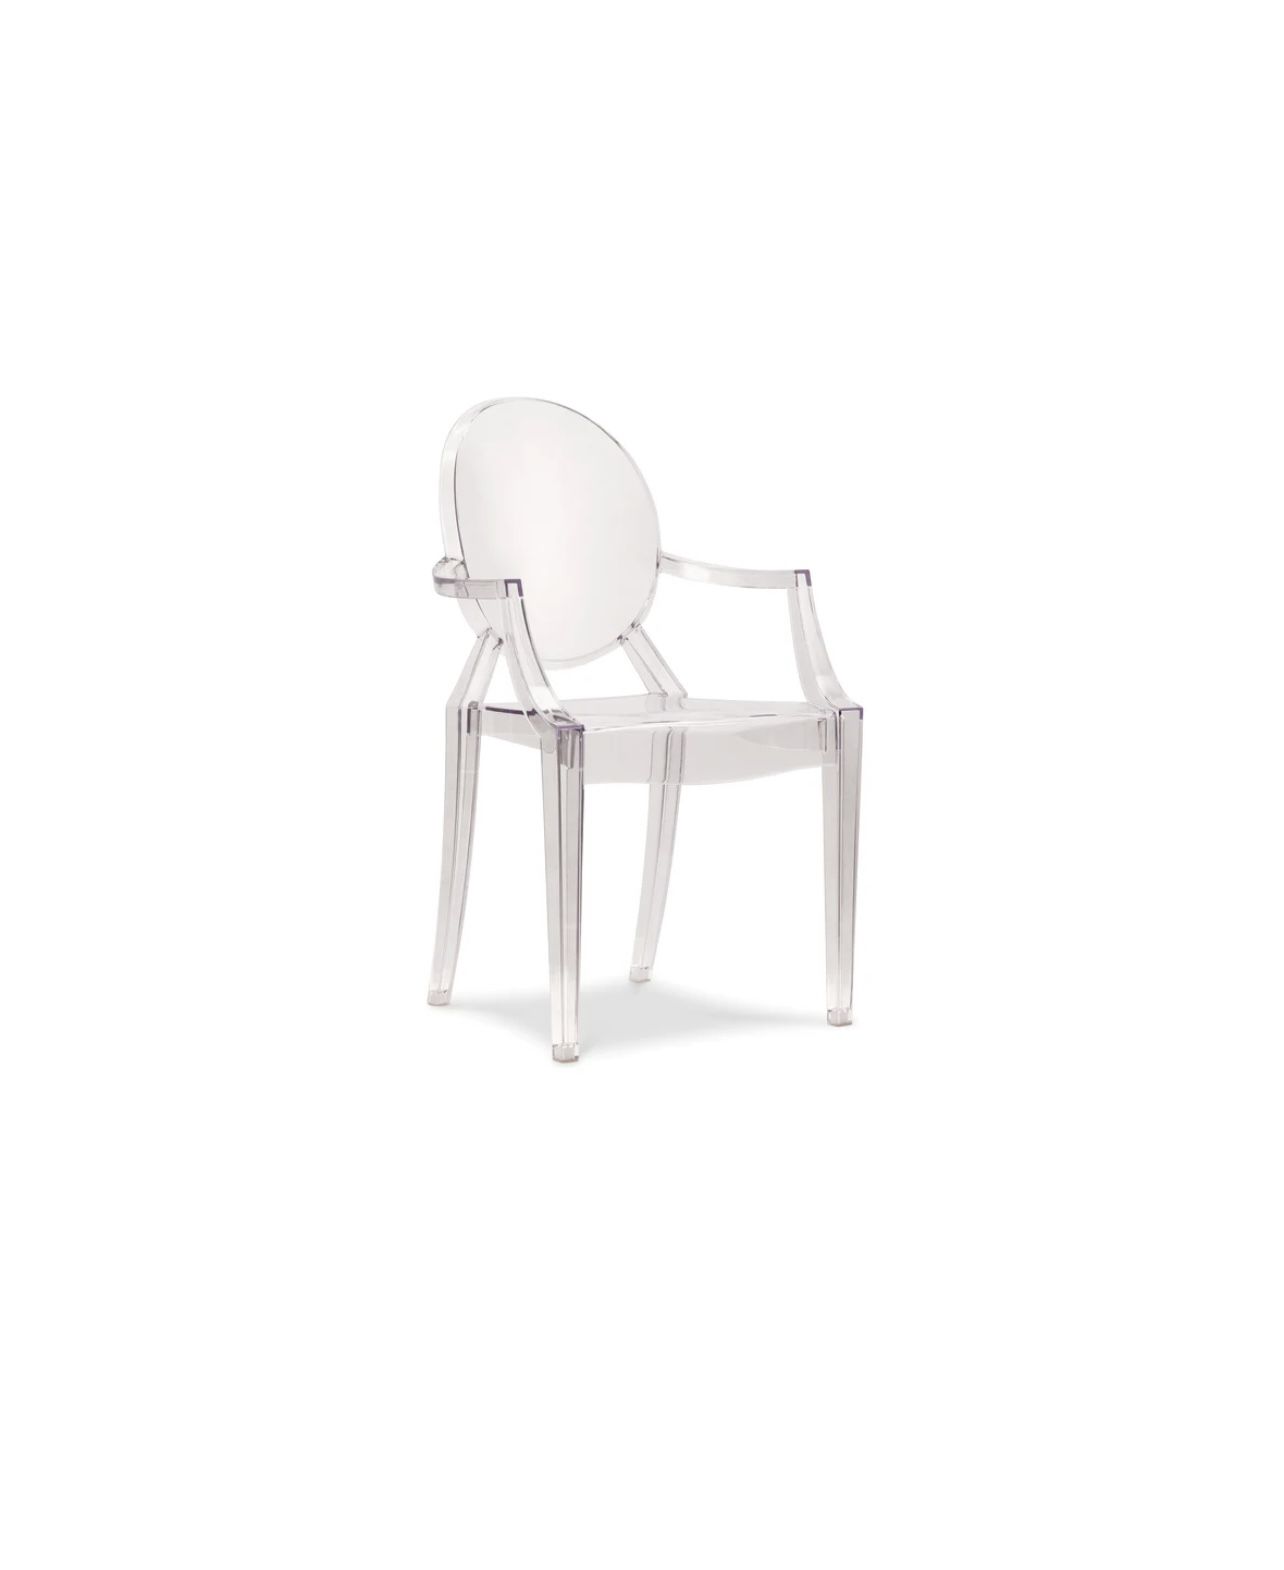 Clear Acrylic Ghost Arm Chairs (x4)